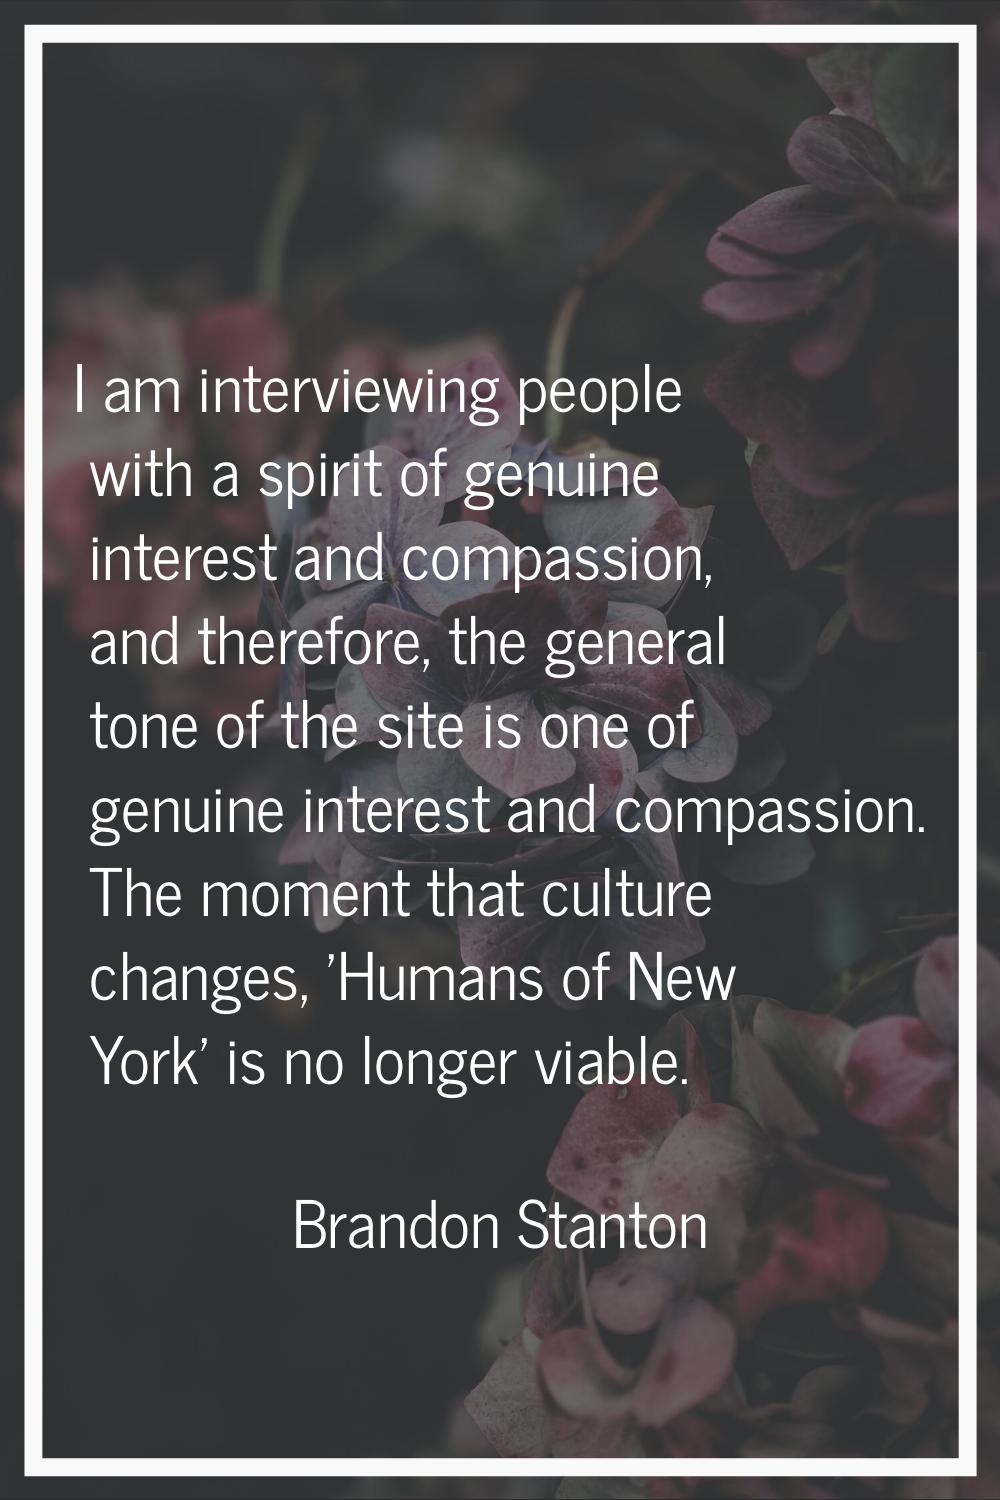 I am interviewing people with a spirit of genuine interest and compassion, and therefore, the gener